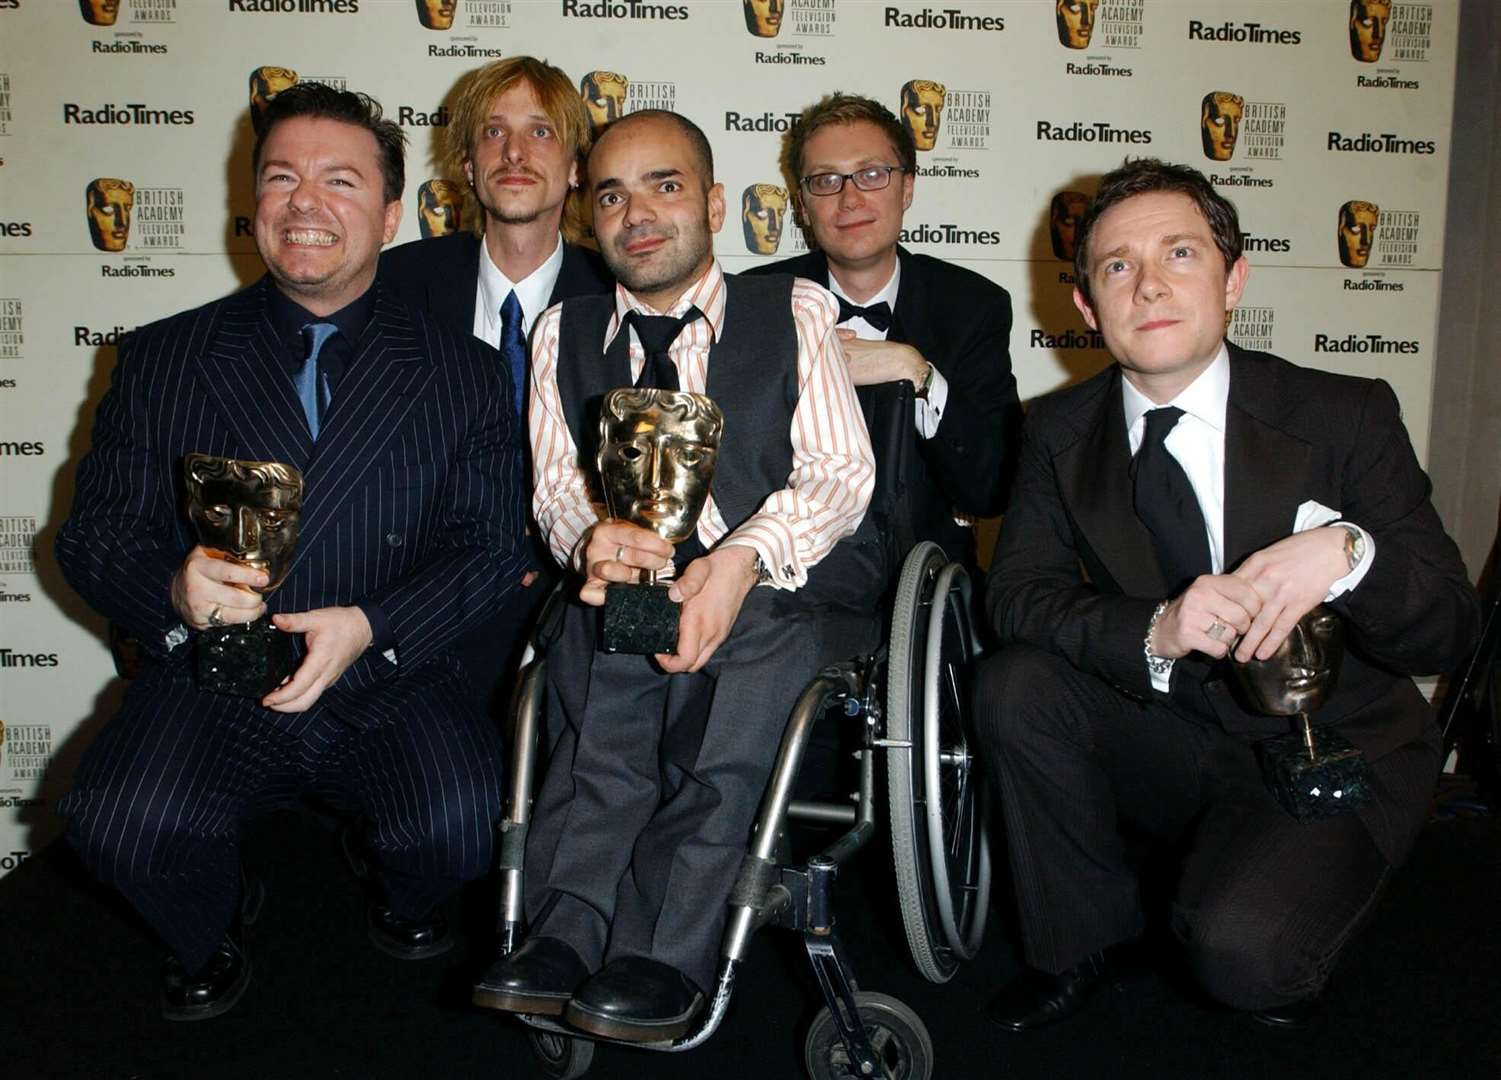 (From left to right) Ricky Gervais, Mackenzie Crook, Ash Atalla, Stephen Merchant and Martin Freeman starred in The Office (Ian West/PA)